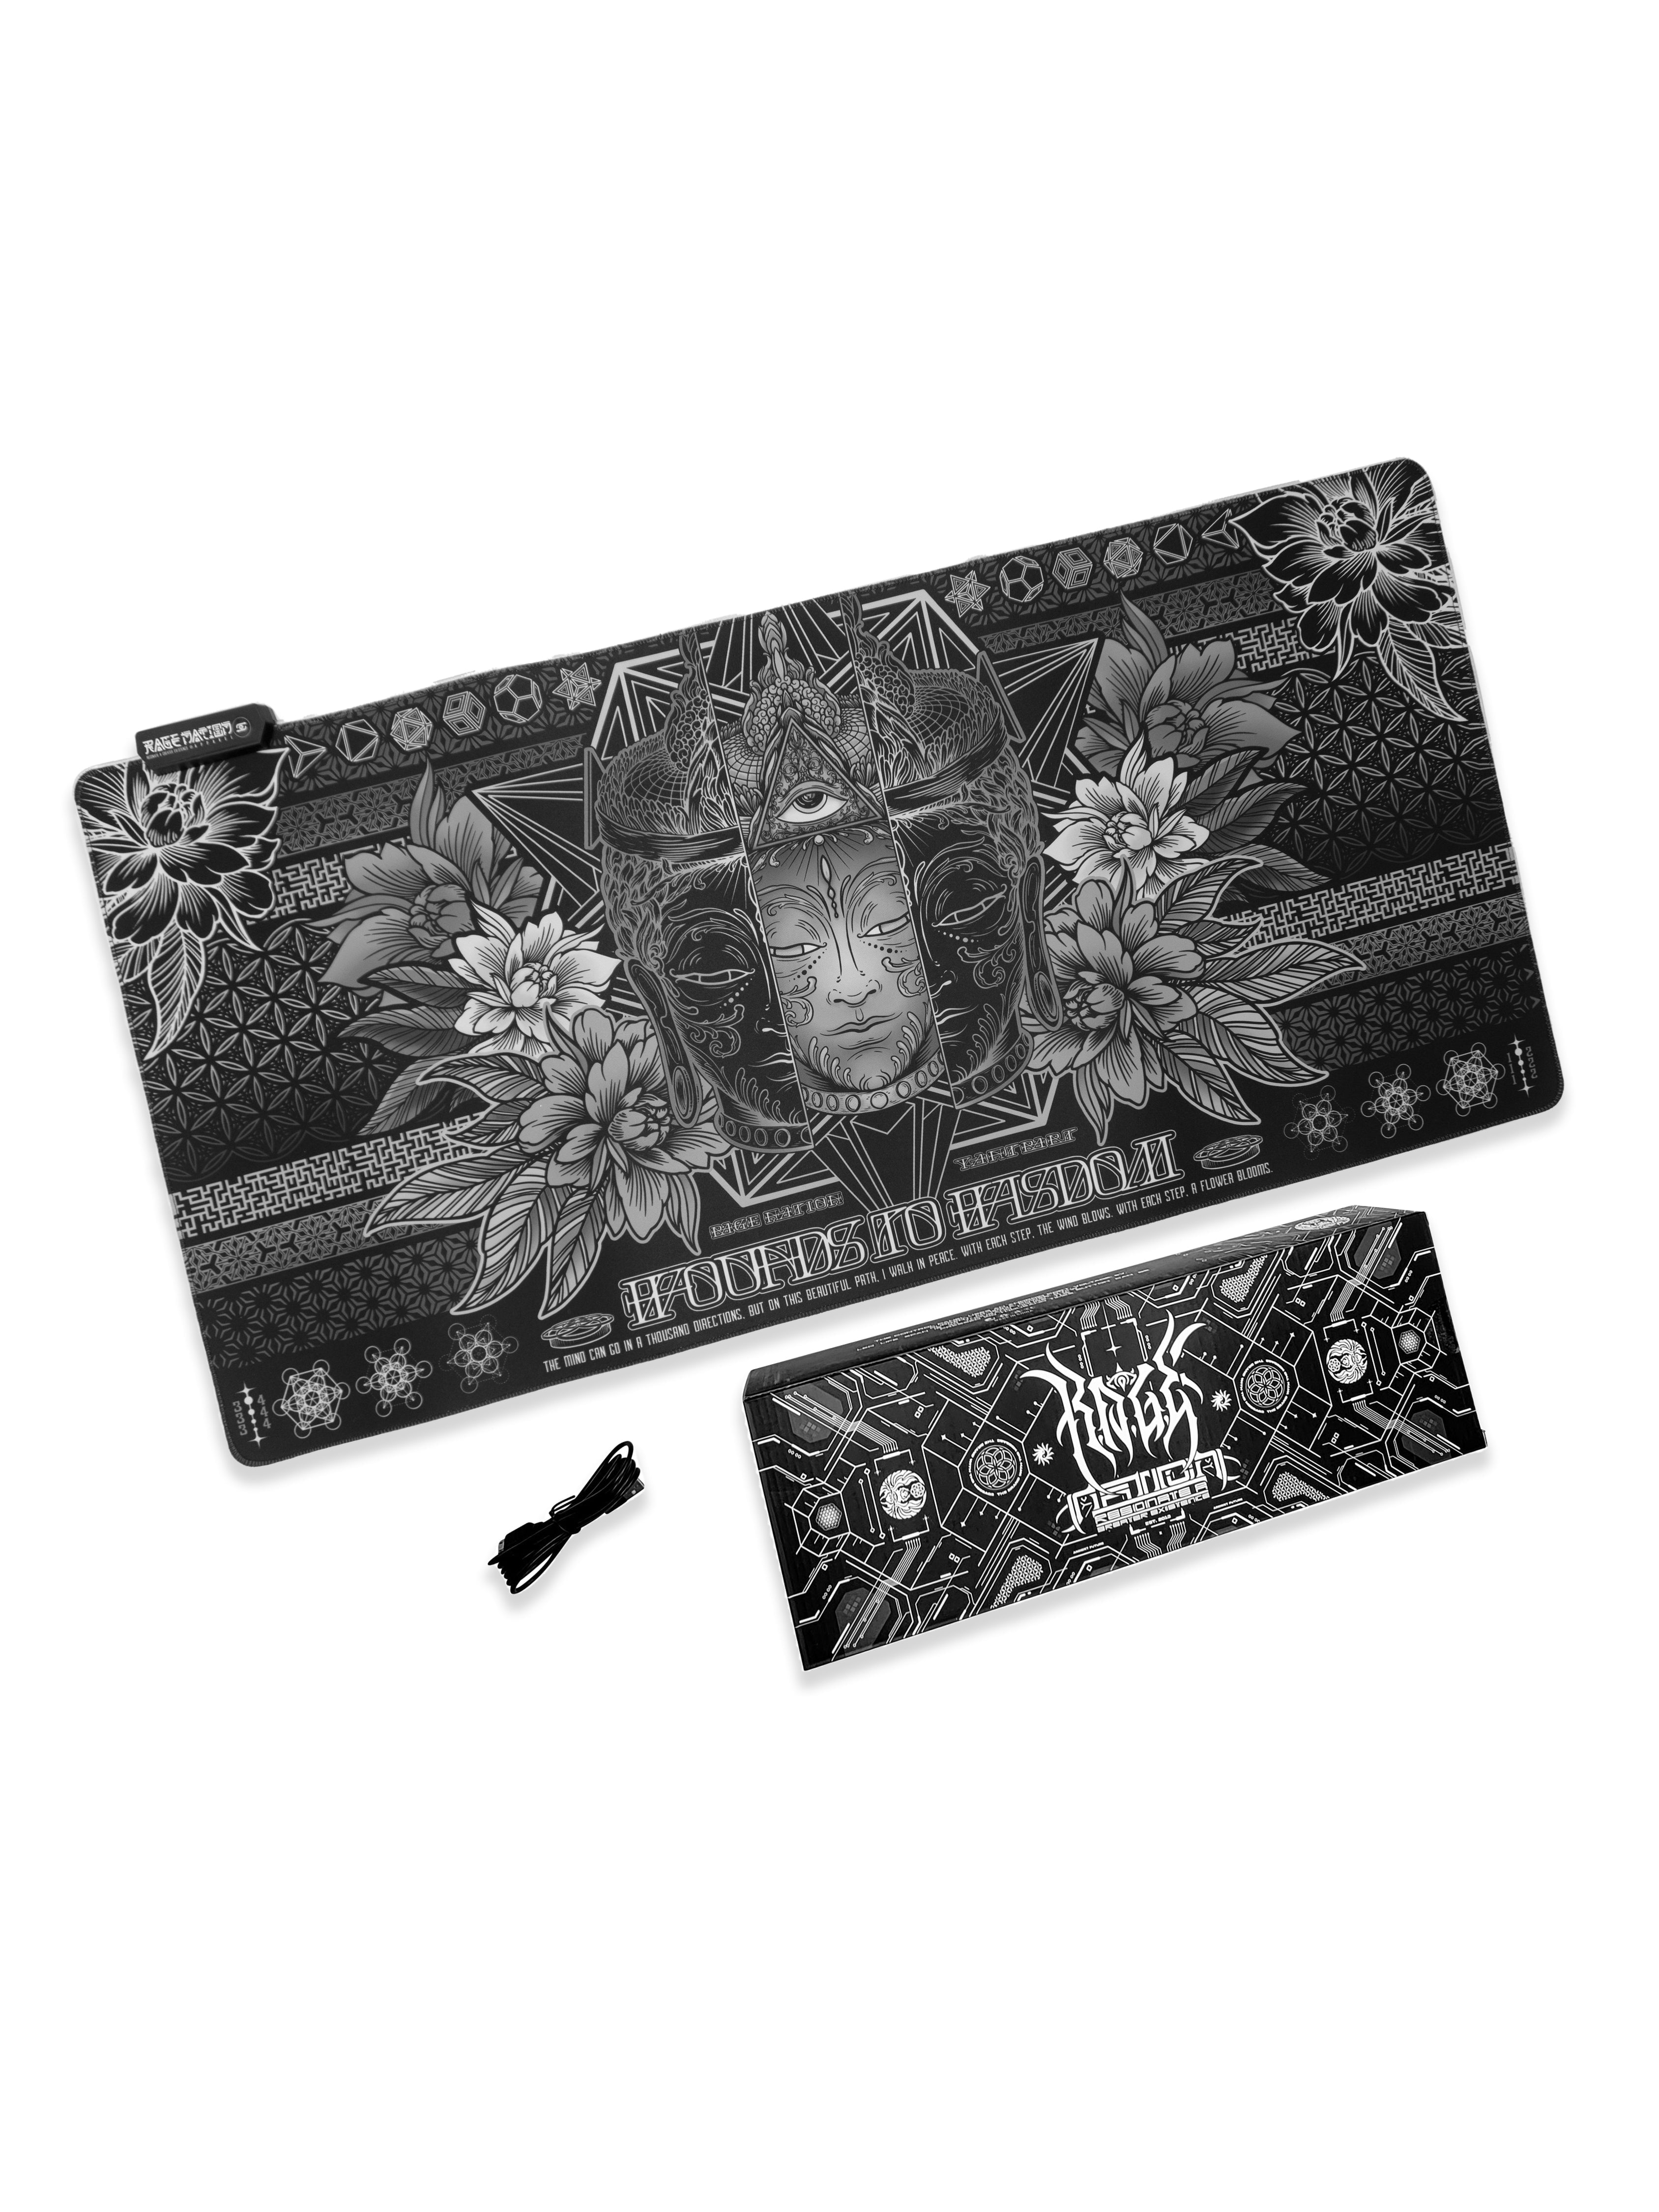 WOUNDS TO WISDOM V1 • MONOCHROME • XXL RGB GAMING MOUSEPAD Mouse Pad 